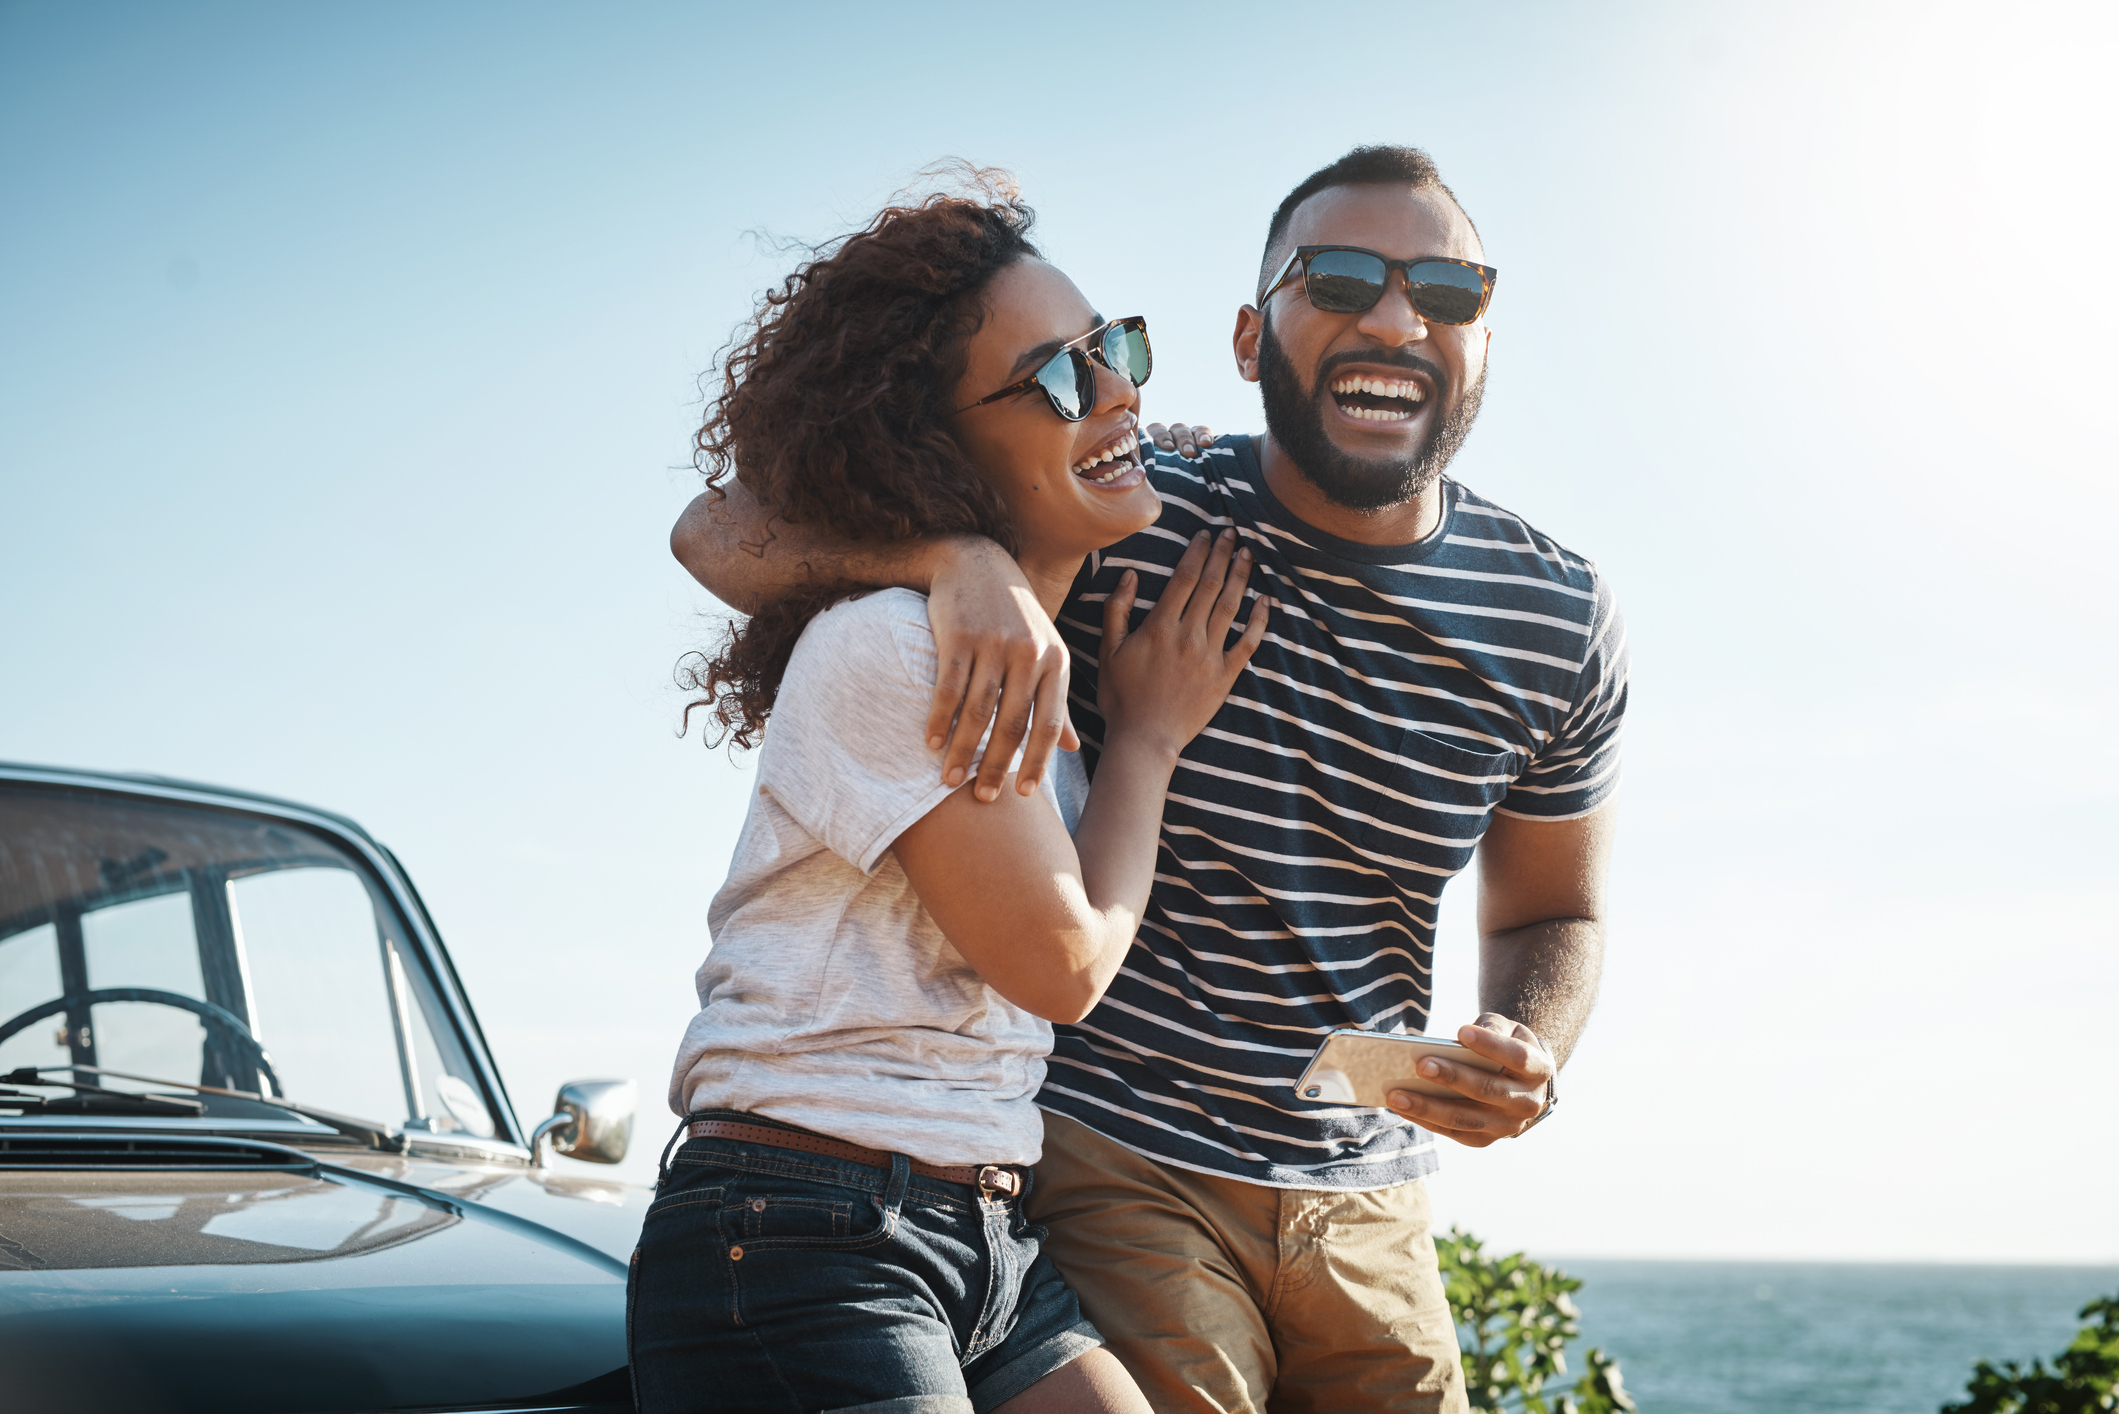 Man and woman laughing together beside a car on a sunny day, representing joyful parenting moments